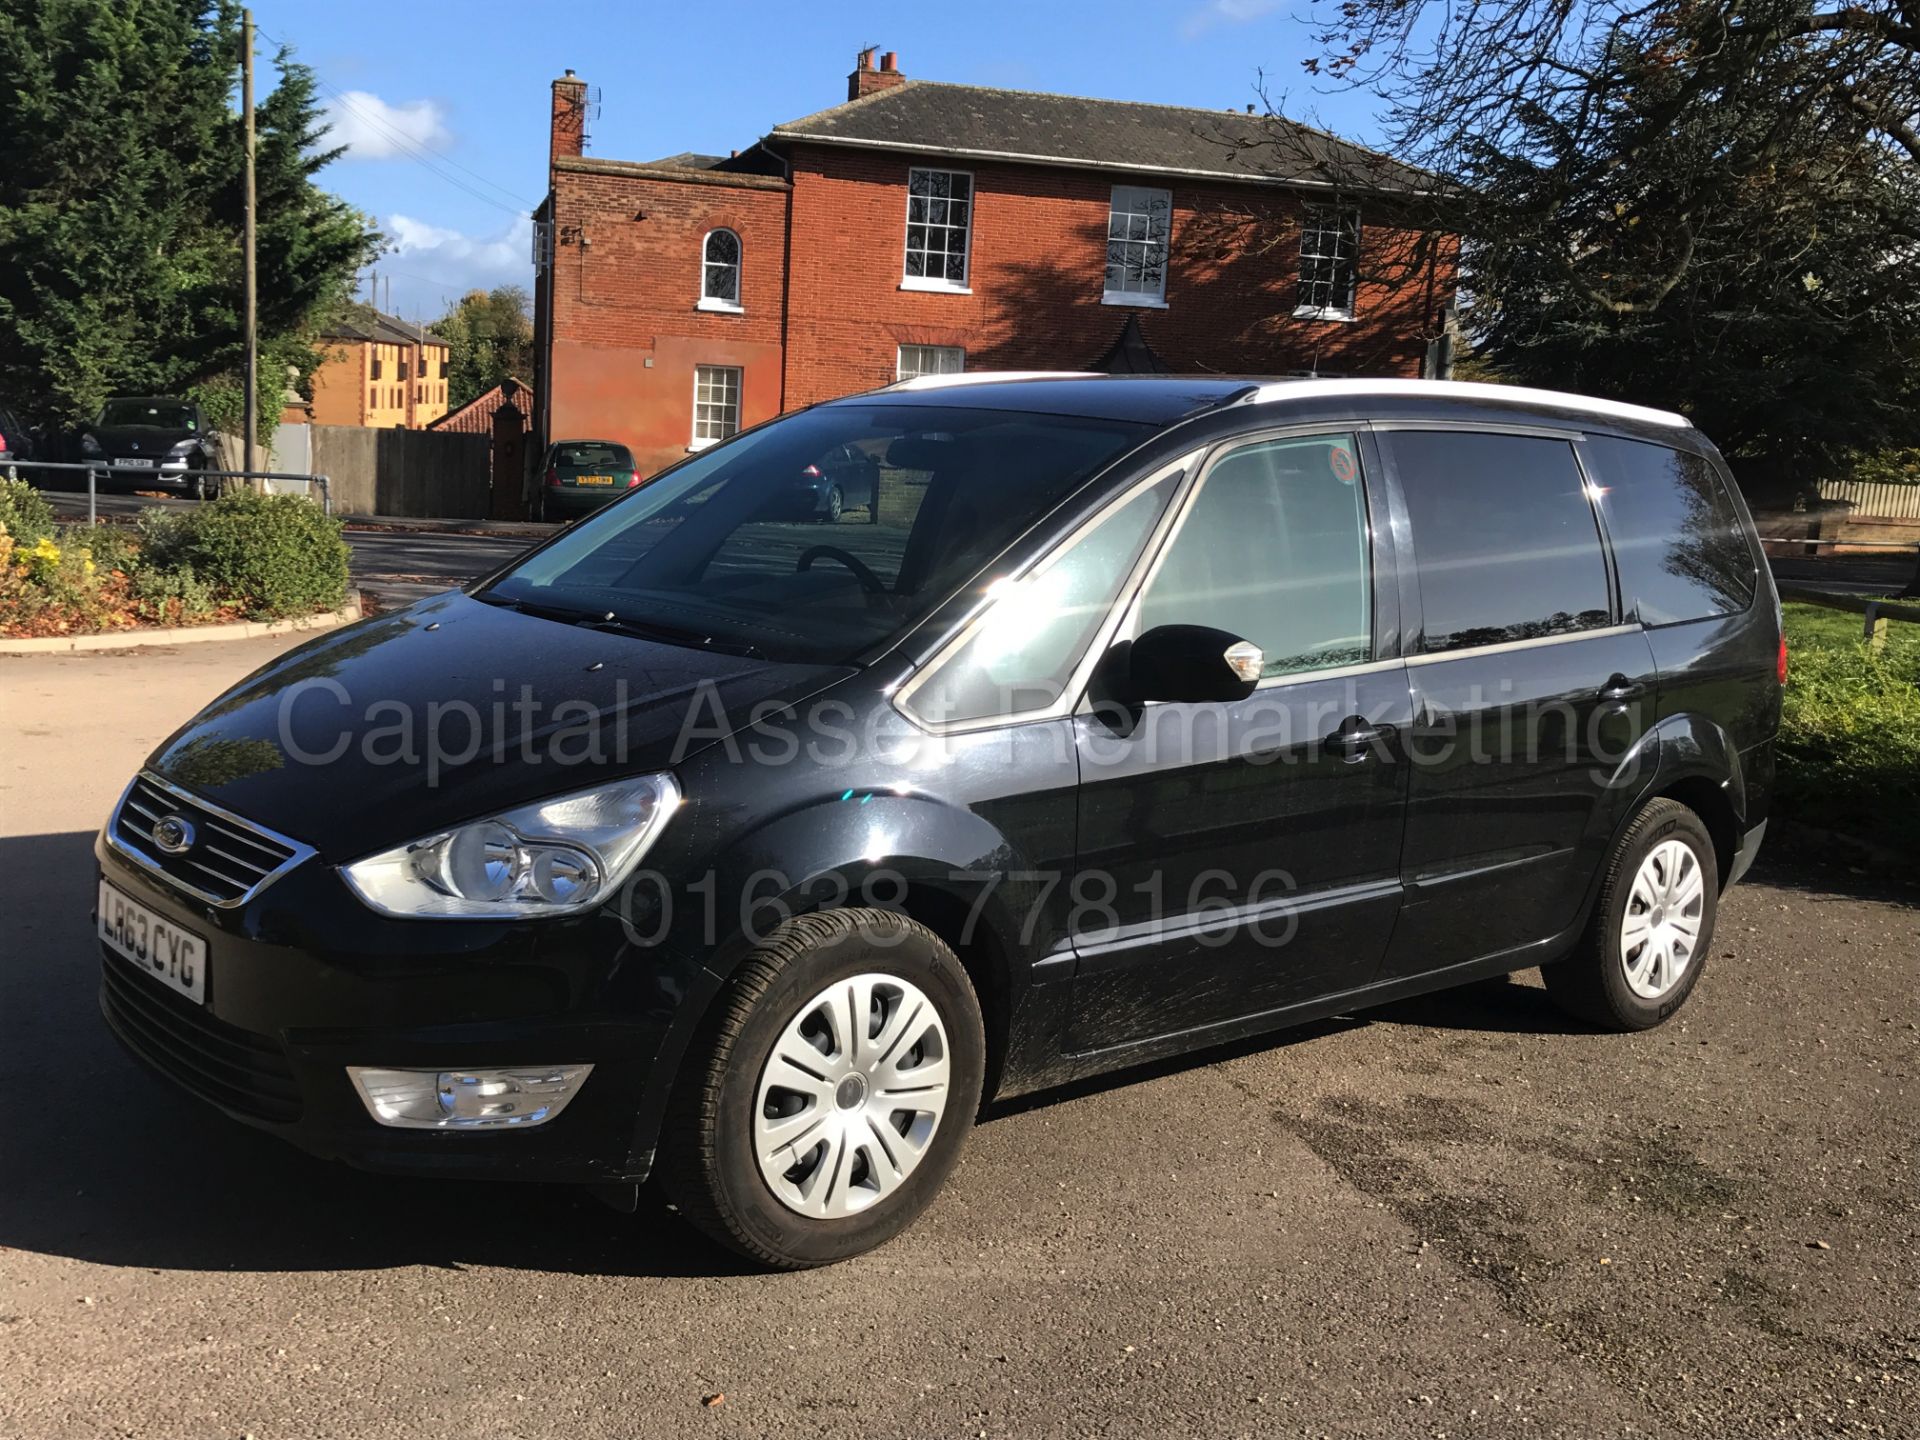 (ON SALE) FORD GALAXY 'ZETEC' 7 SEATER MPV (2014 MODEL) '2.0 TDCI -140 BHP' (1 OWNER) *FULL HISTORY* - Image 2 of 28